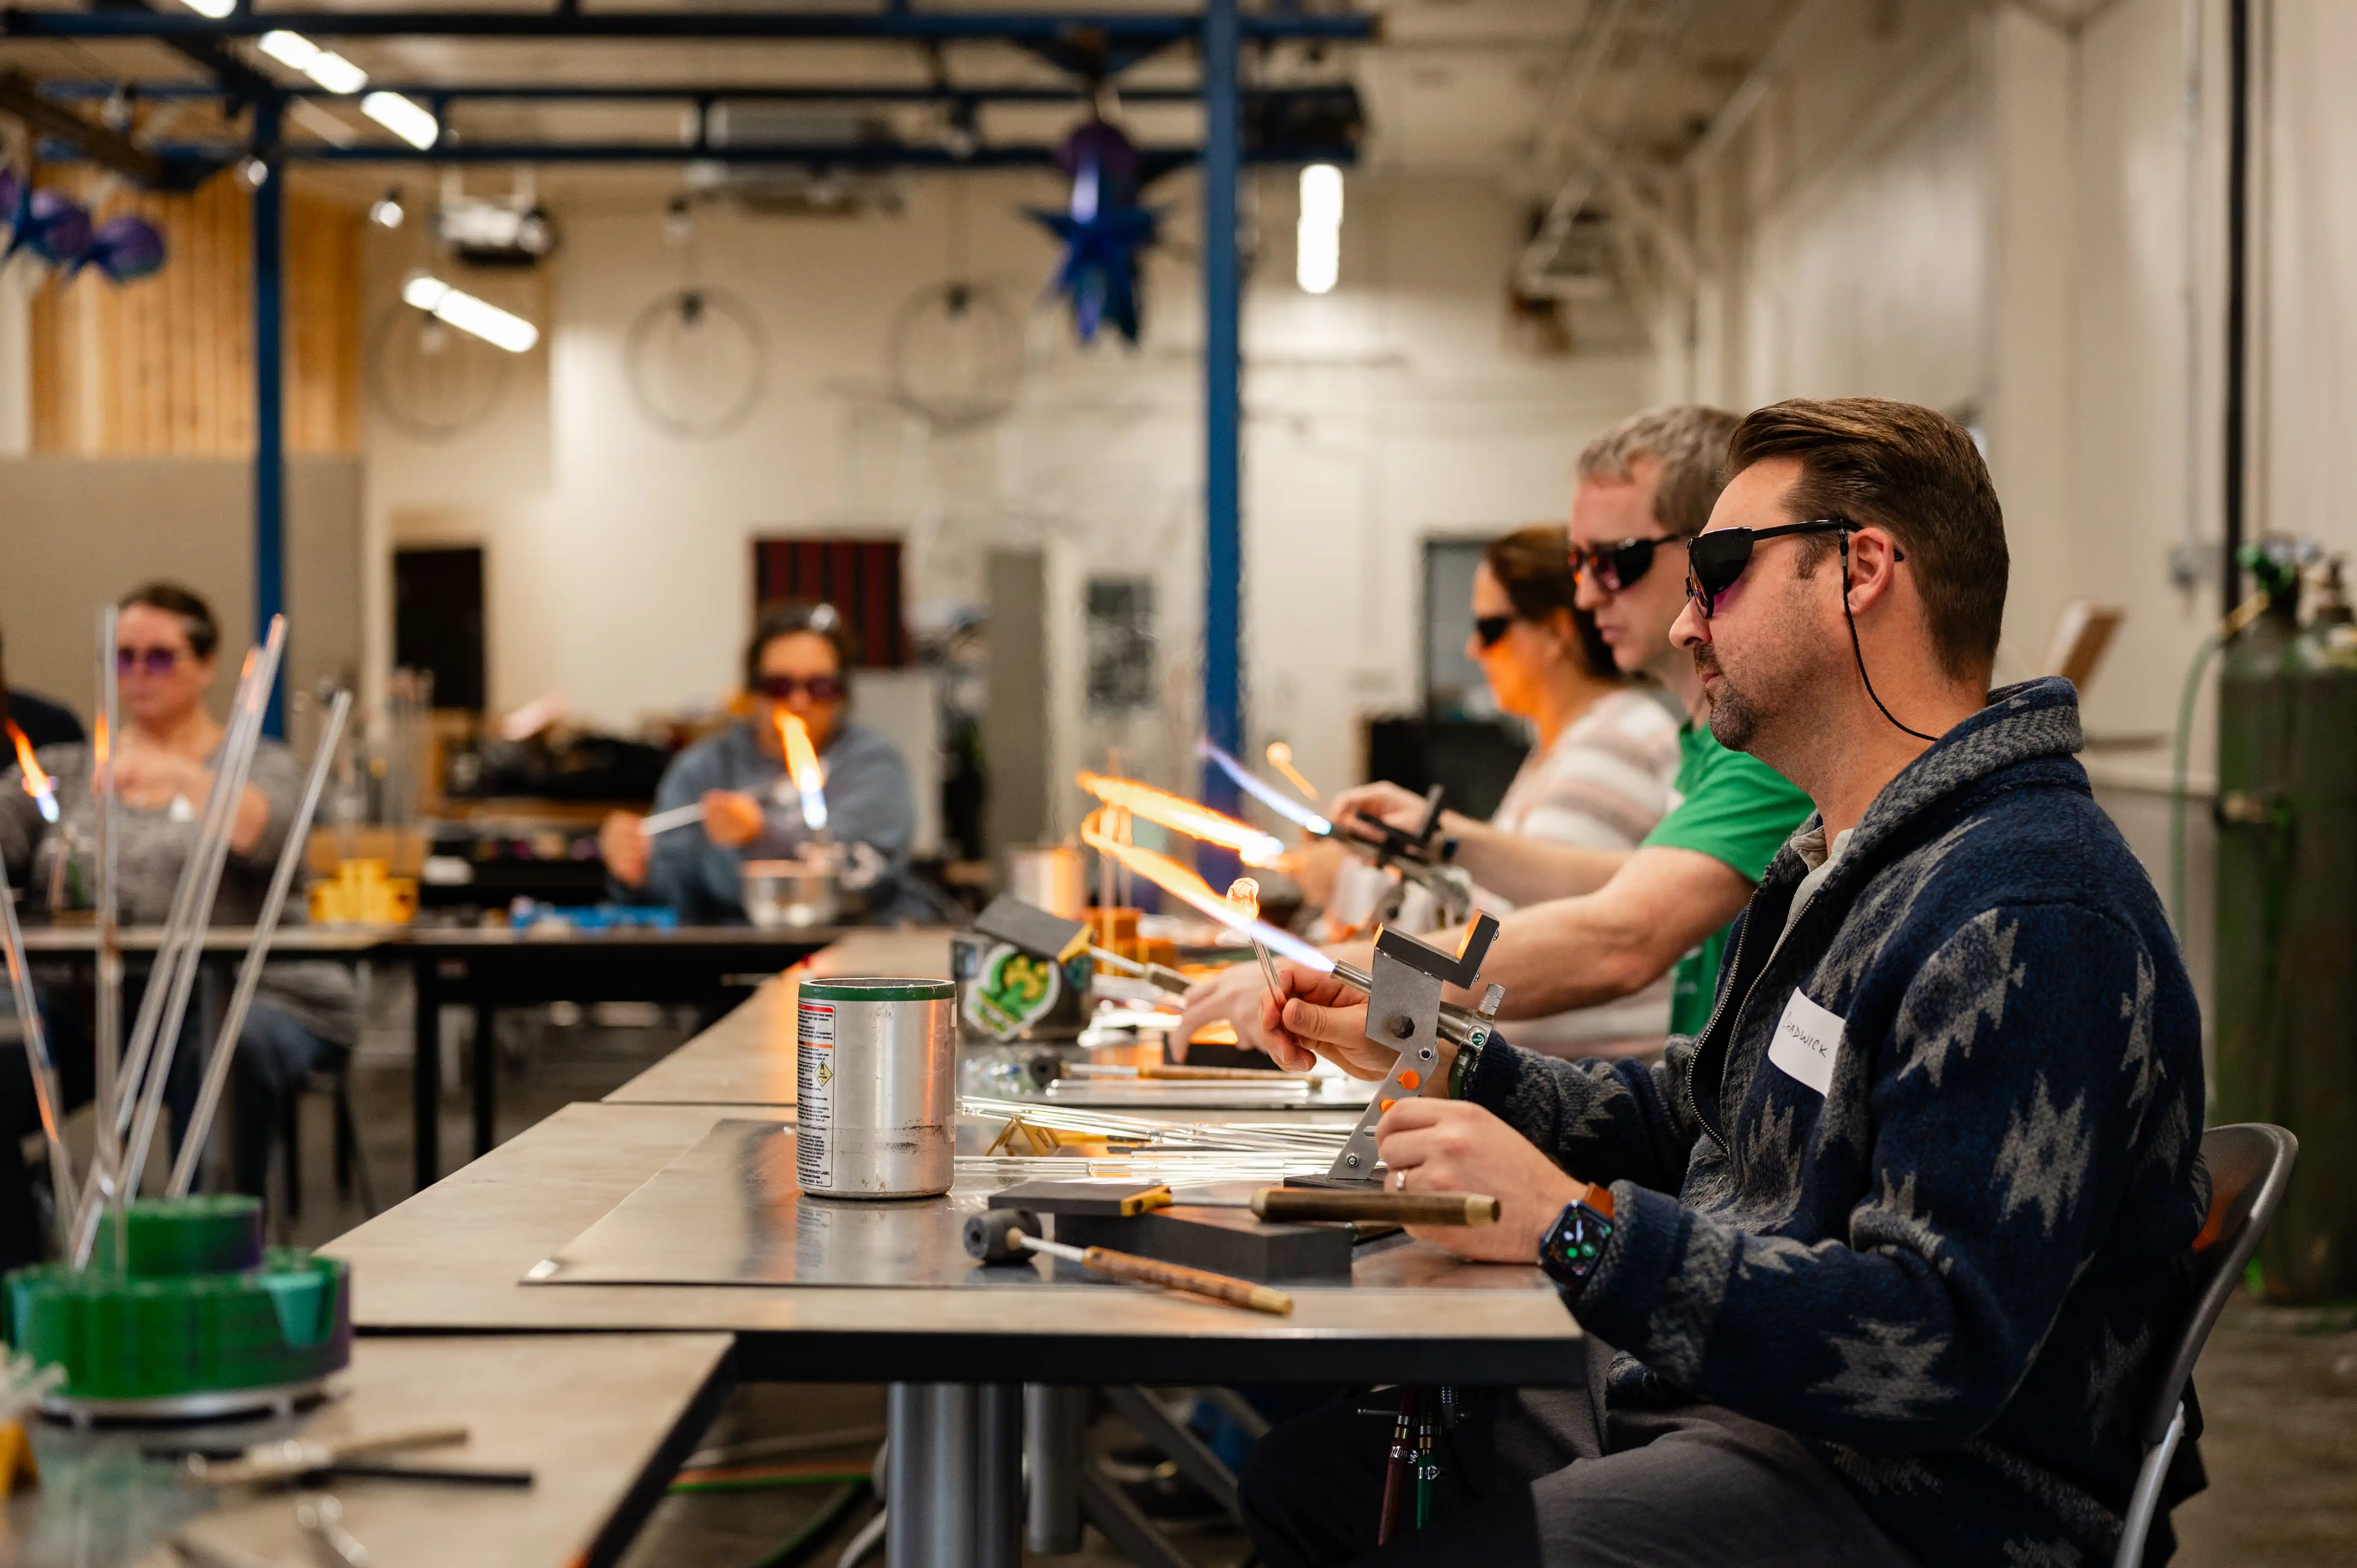 People wearing safety glasses working with glass blowing torches at a glassblowing workshop.